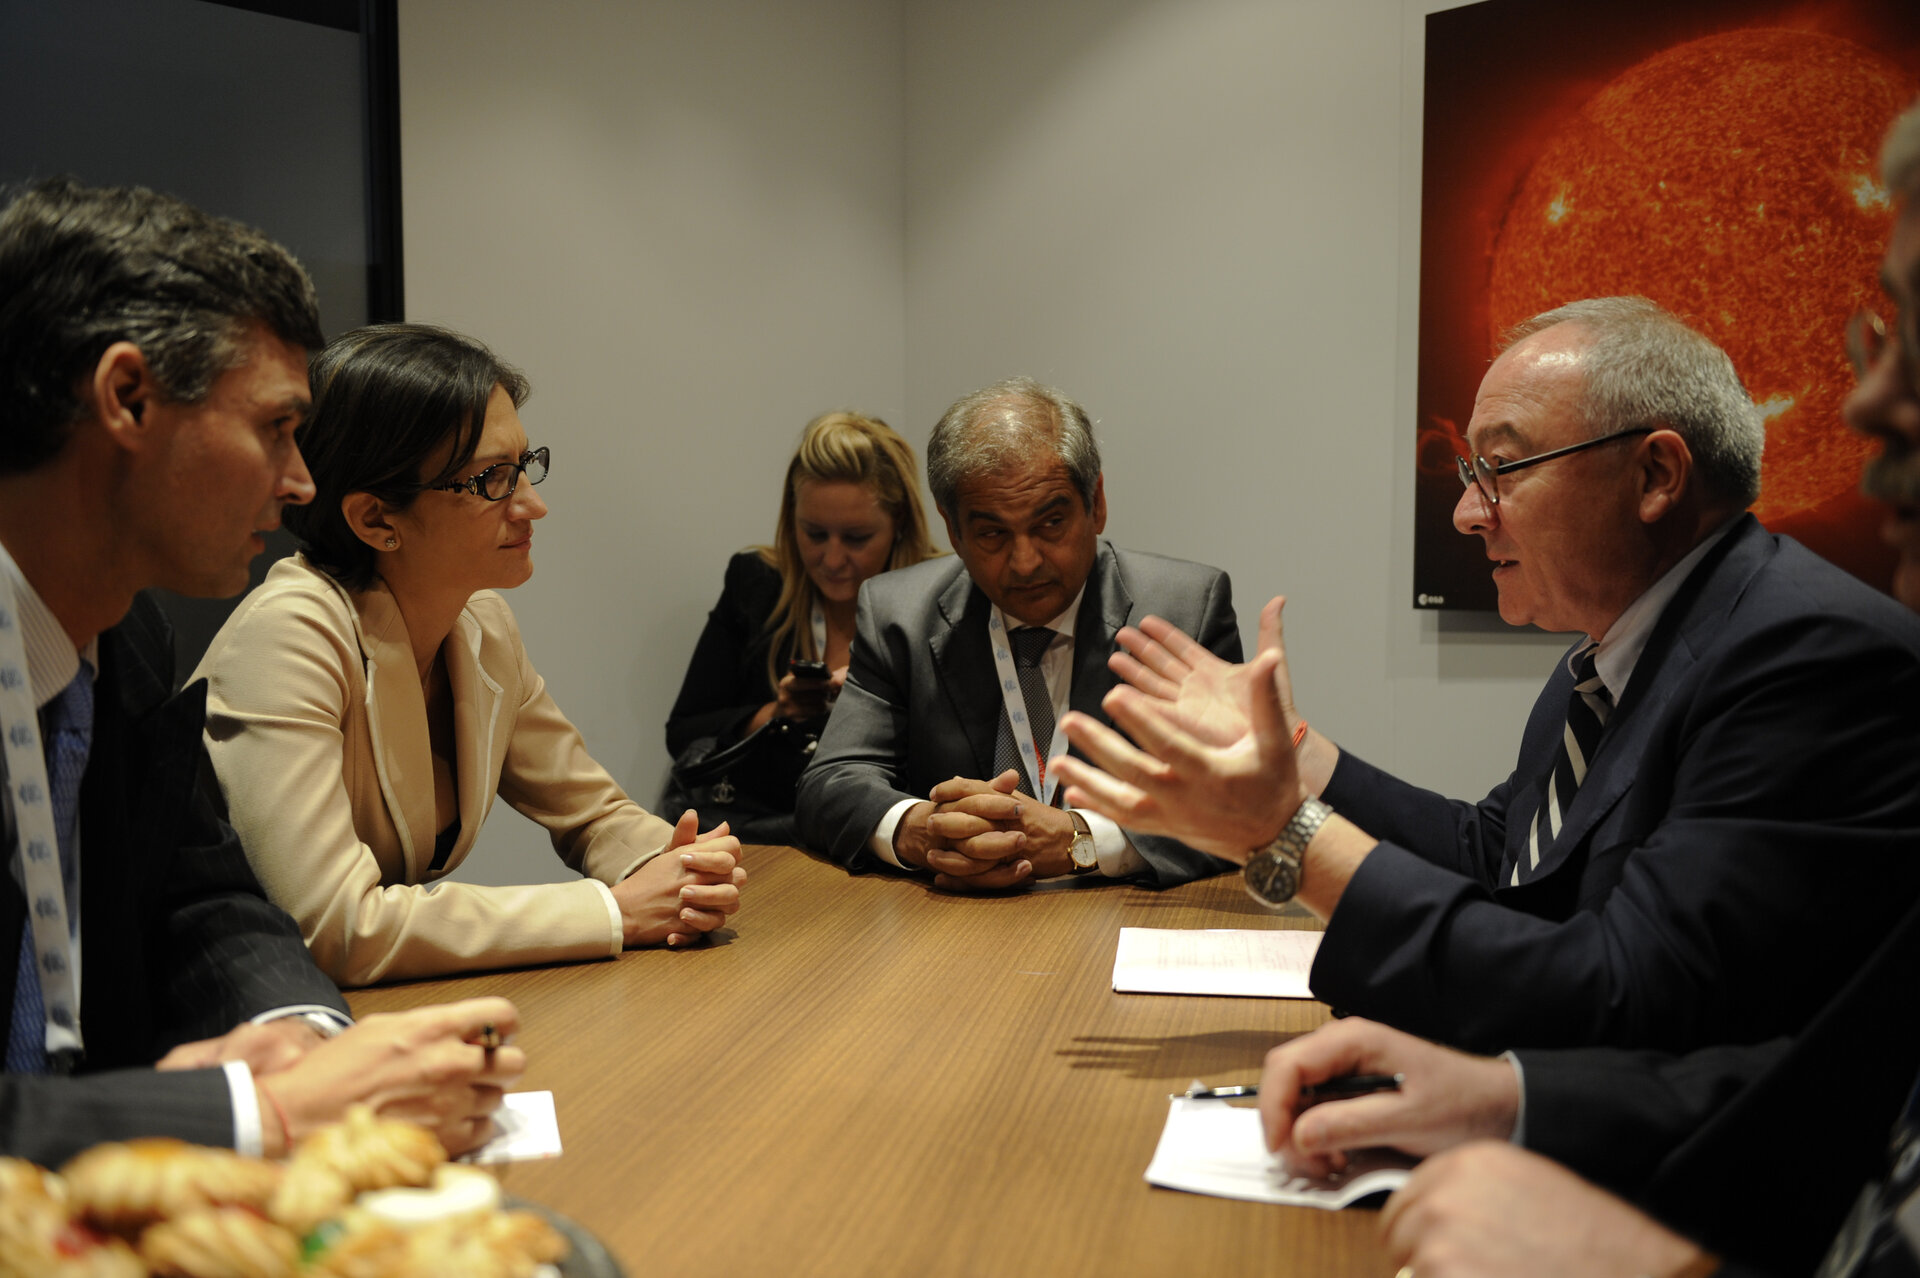 Meeting between the Italian Minister M. Gelmini and ESA